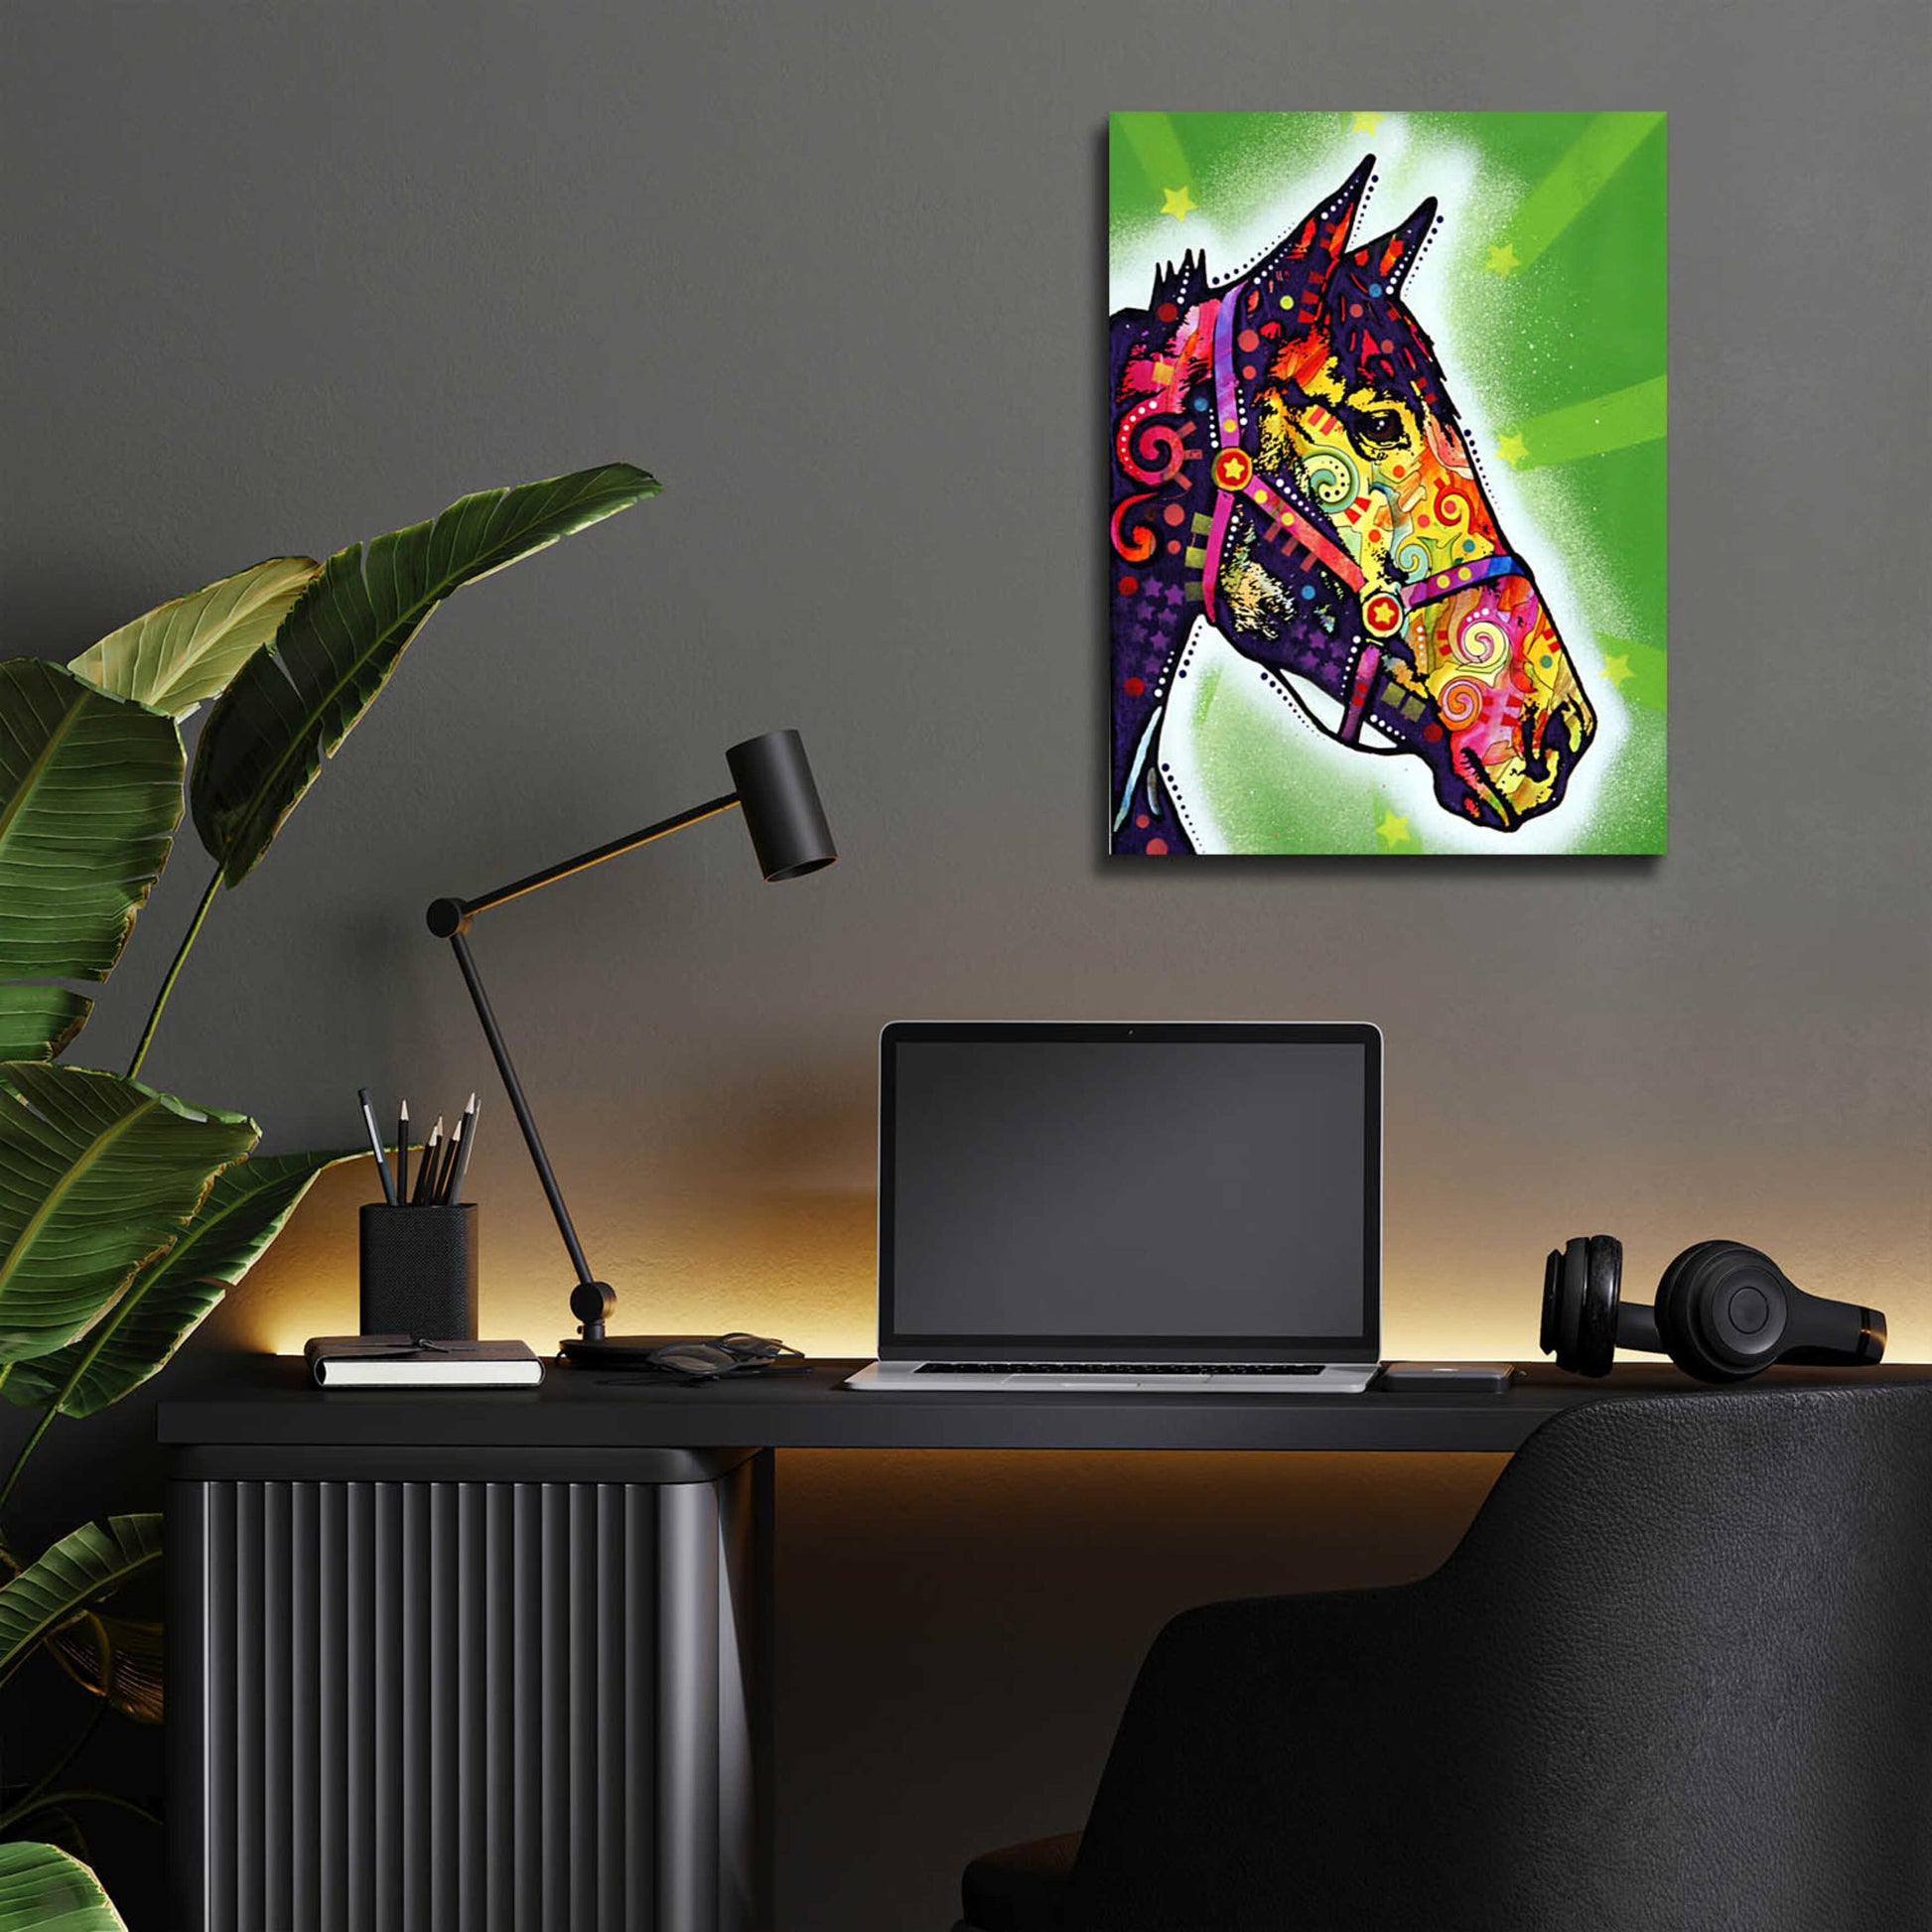 Epic Art 'Horse 2' by Dean Russo, Acrylic Glass Wall Art,12x16